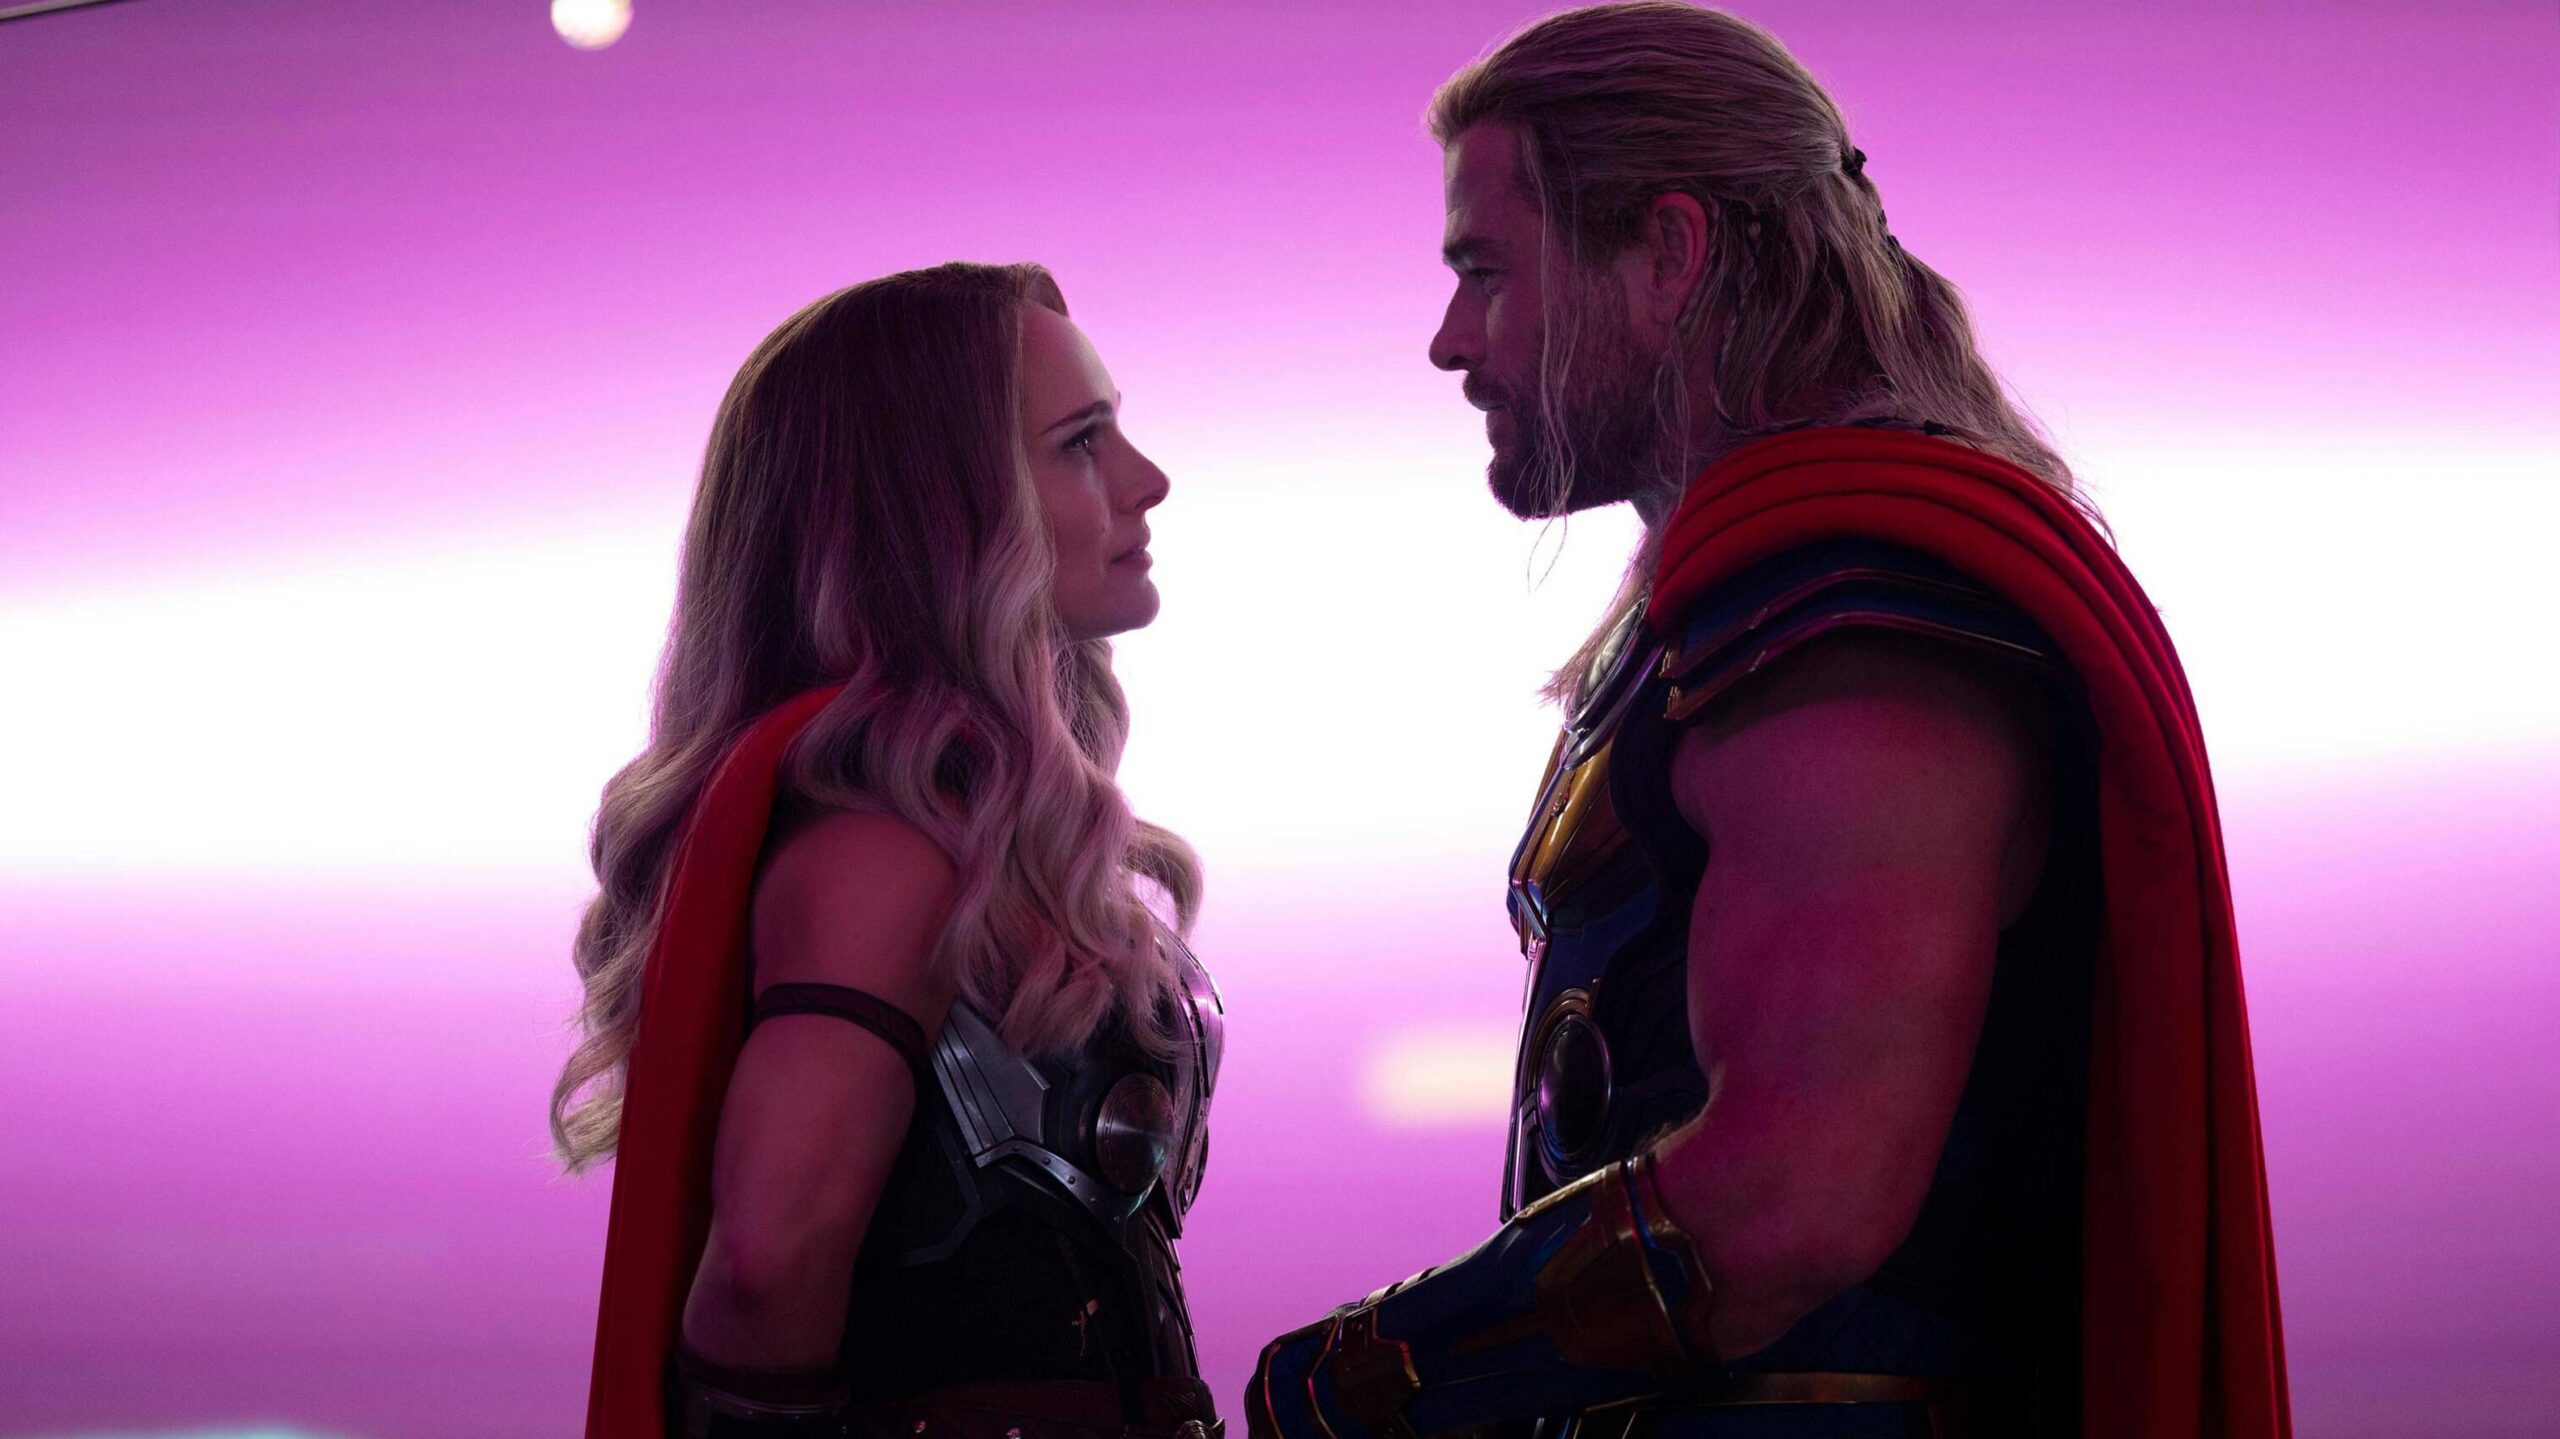 Natalie Portman as The Mighty Thor and Chris Hemsworth as Thor in Thor: Love and Thunder. The two are standing close to one another with a bright purple light behind them.